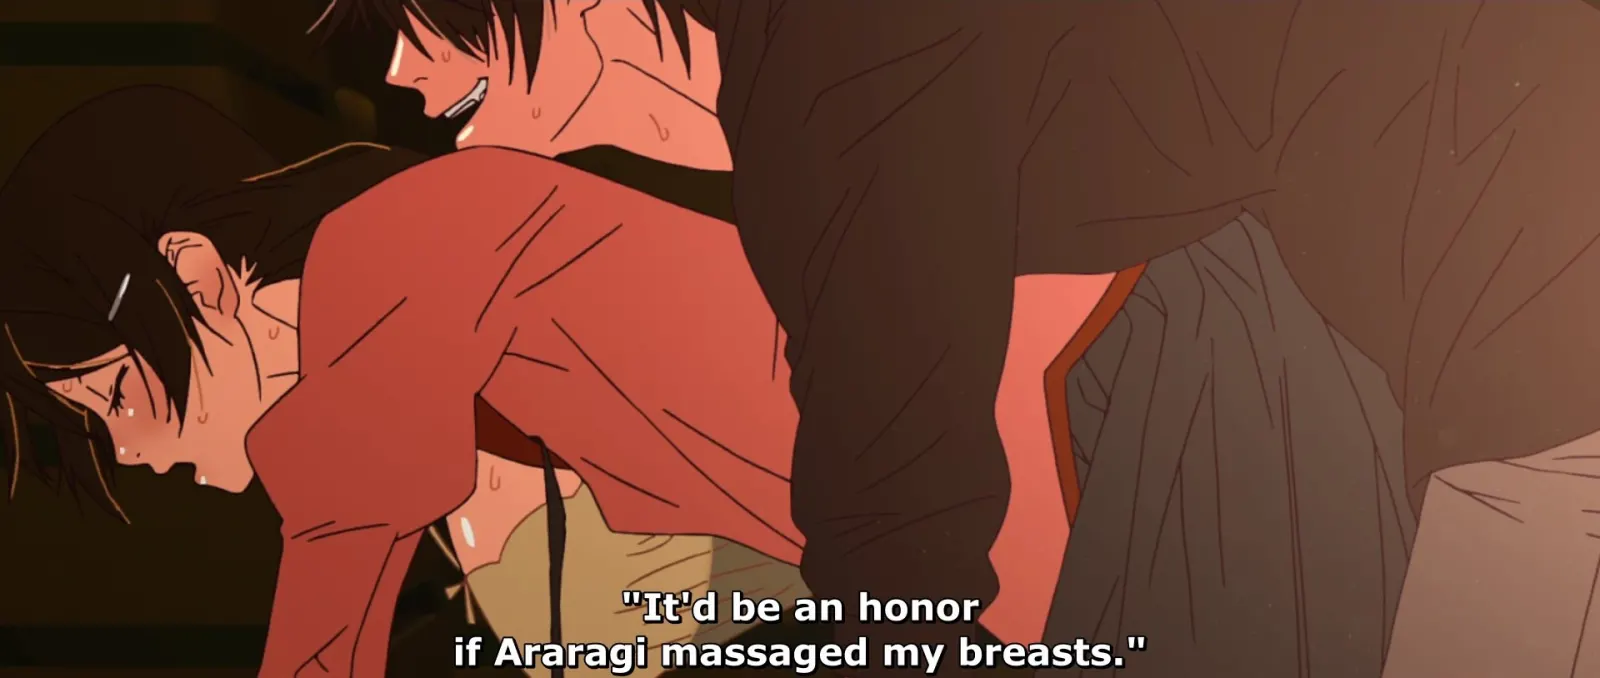 No, Araragi, it is not acceptable to pressure girls into saying such things.